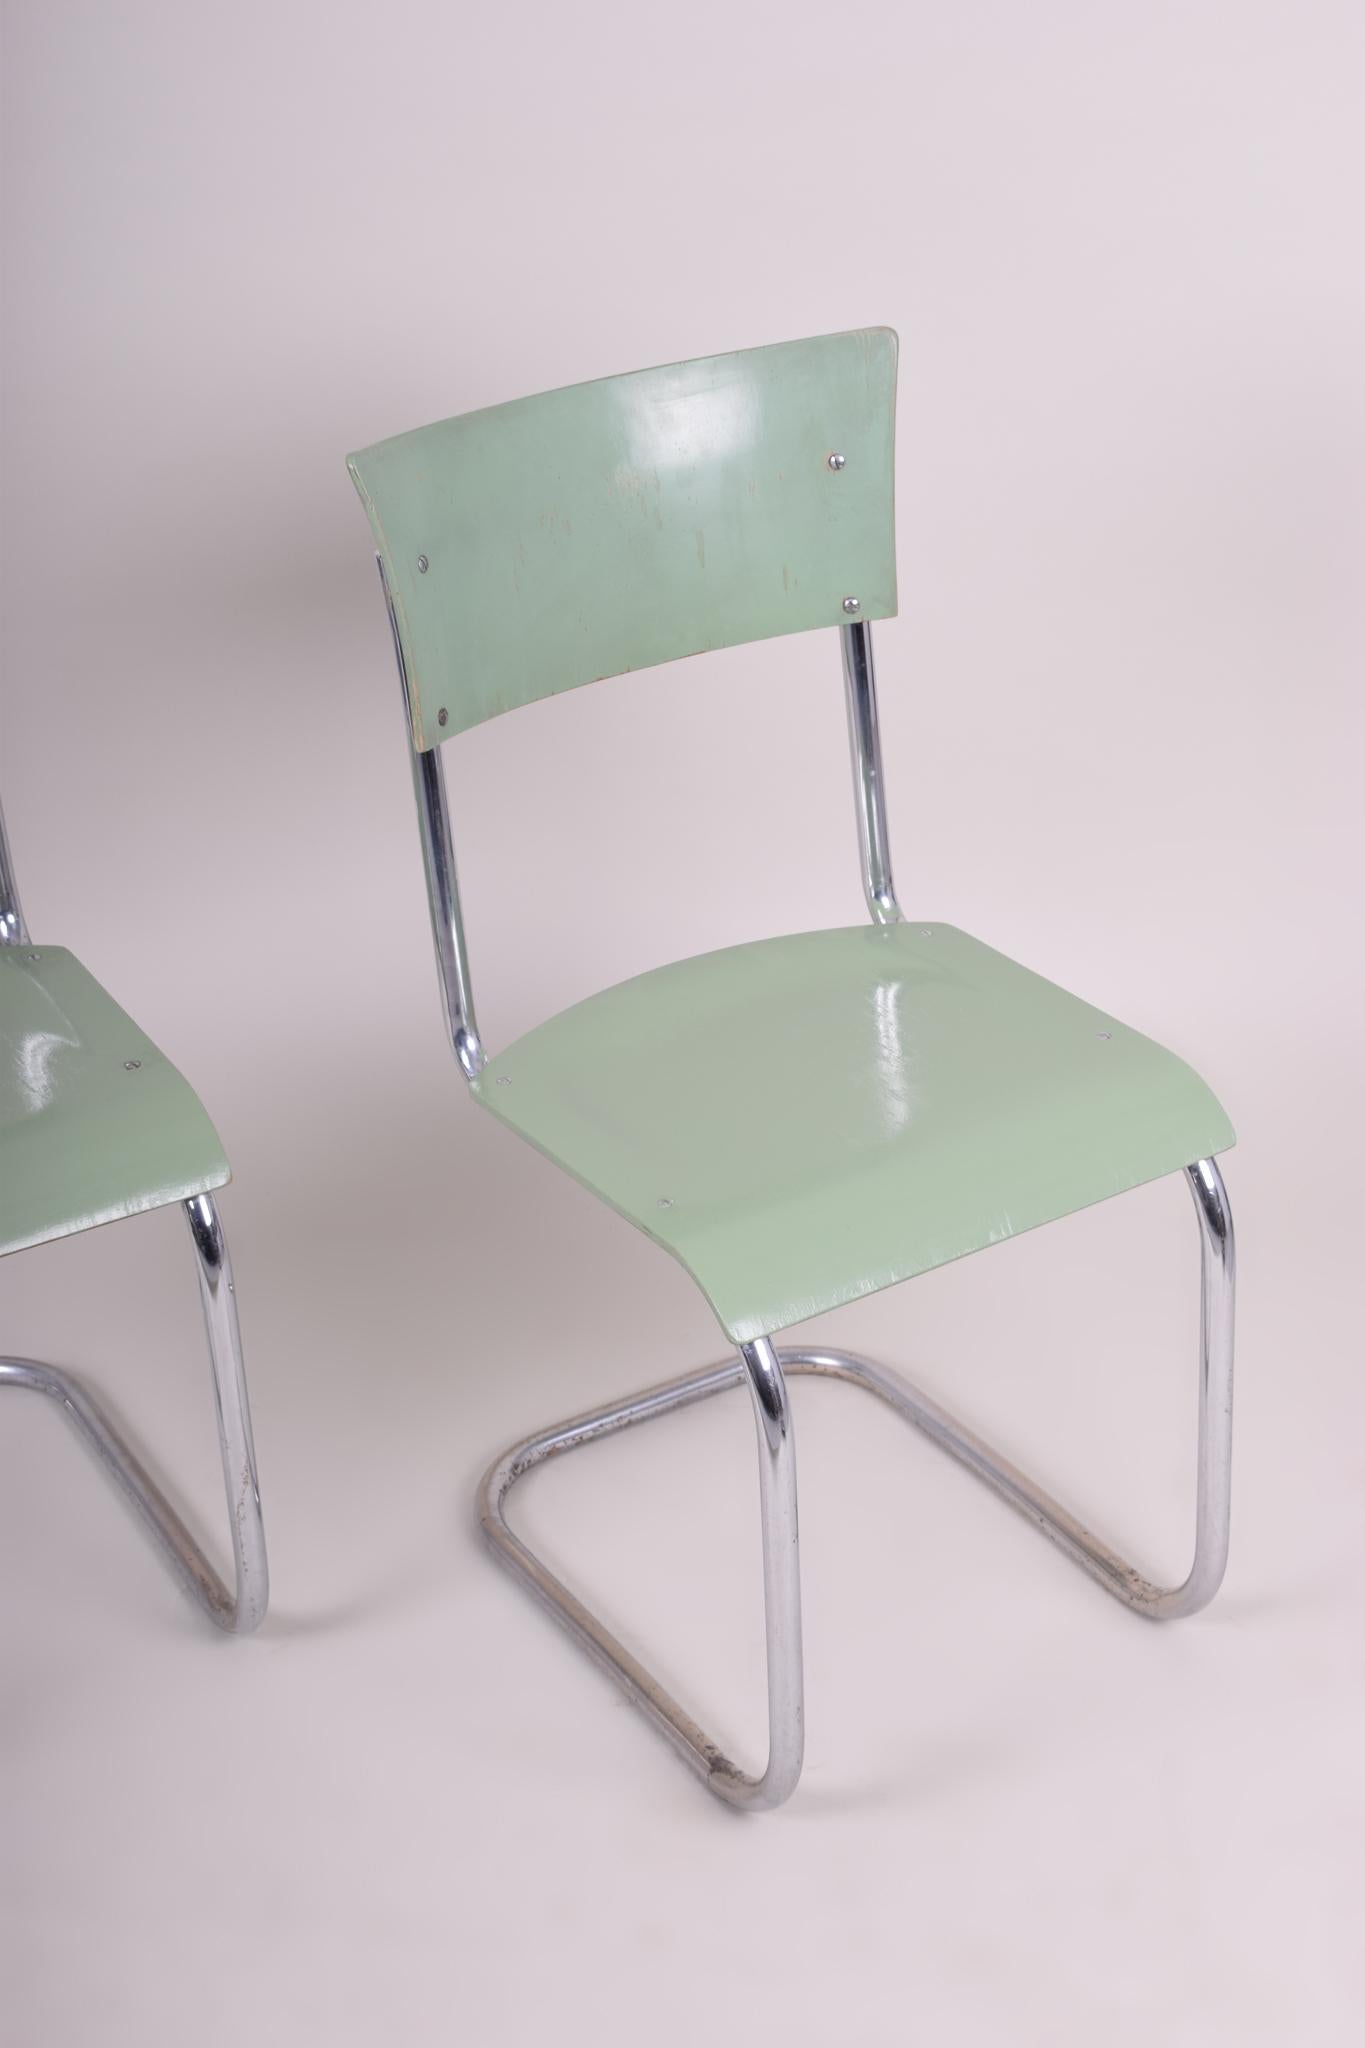 Green Vintage Bauhaus Set of Chairs Manufactured by Robert Slezák, 1930-1939 In Good Condition For Sale In Horomerice, CZ